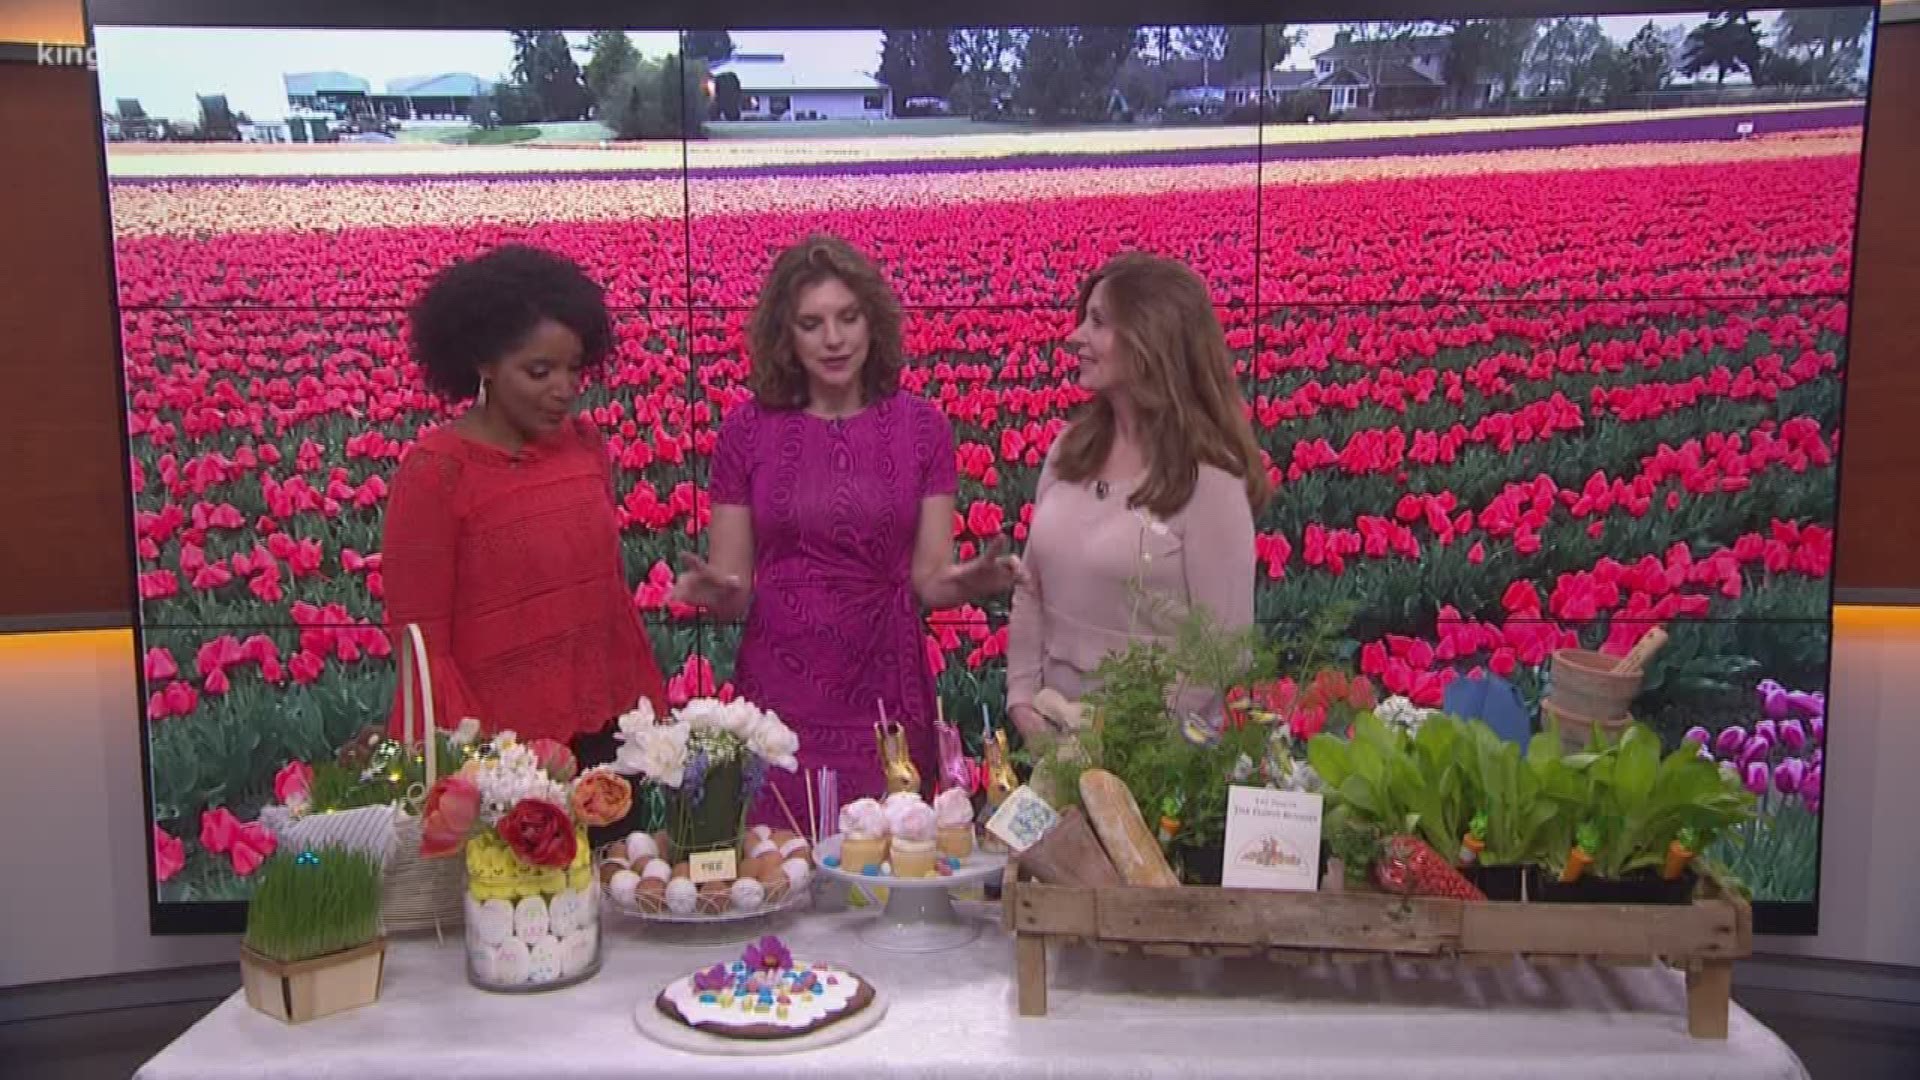 Lifestyle expert Monica Hart helps us bring some of those spring flowers inside.